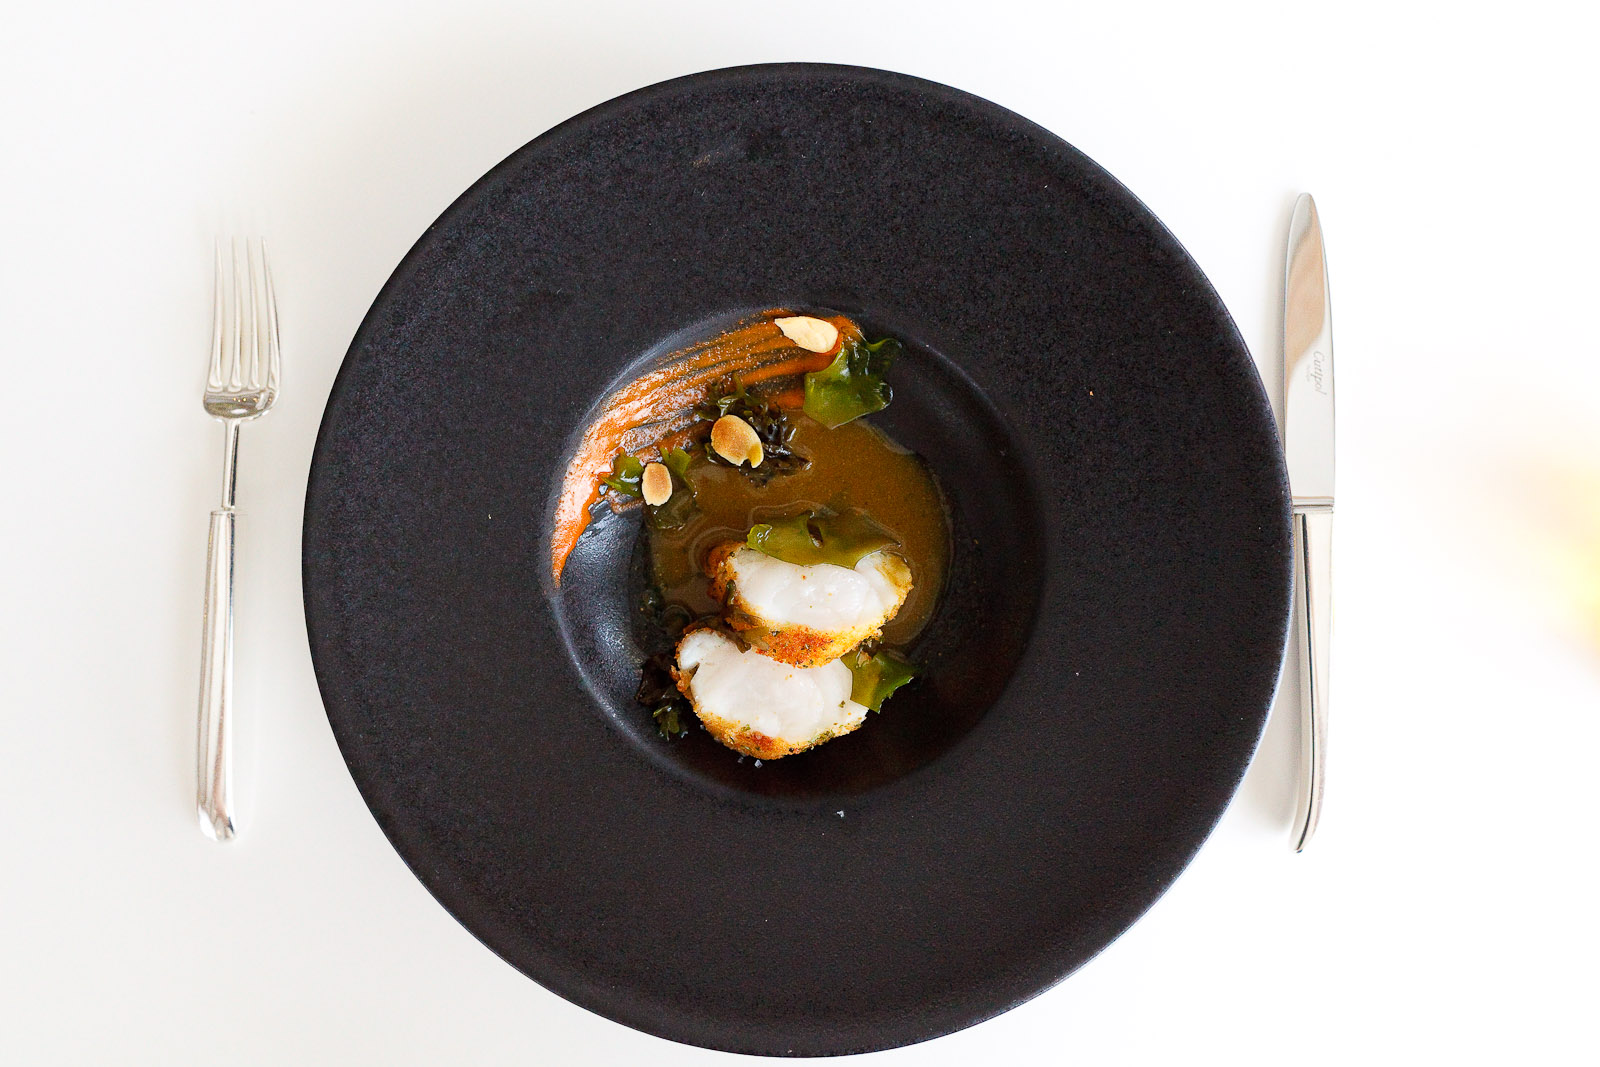 15th Course: Breaded monkfish in seaweed sauce, almonds.